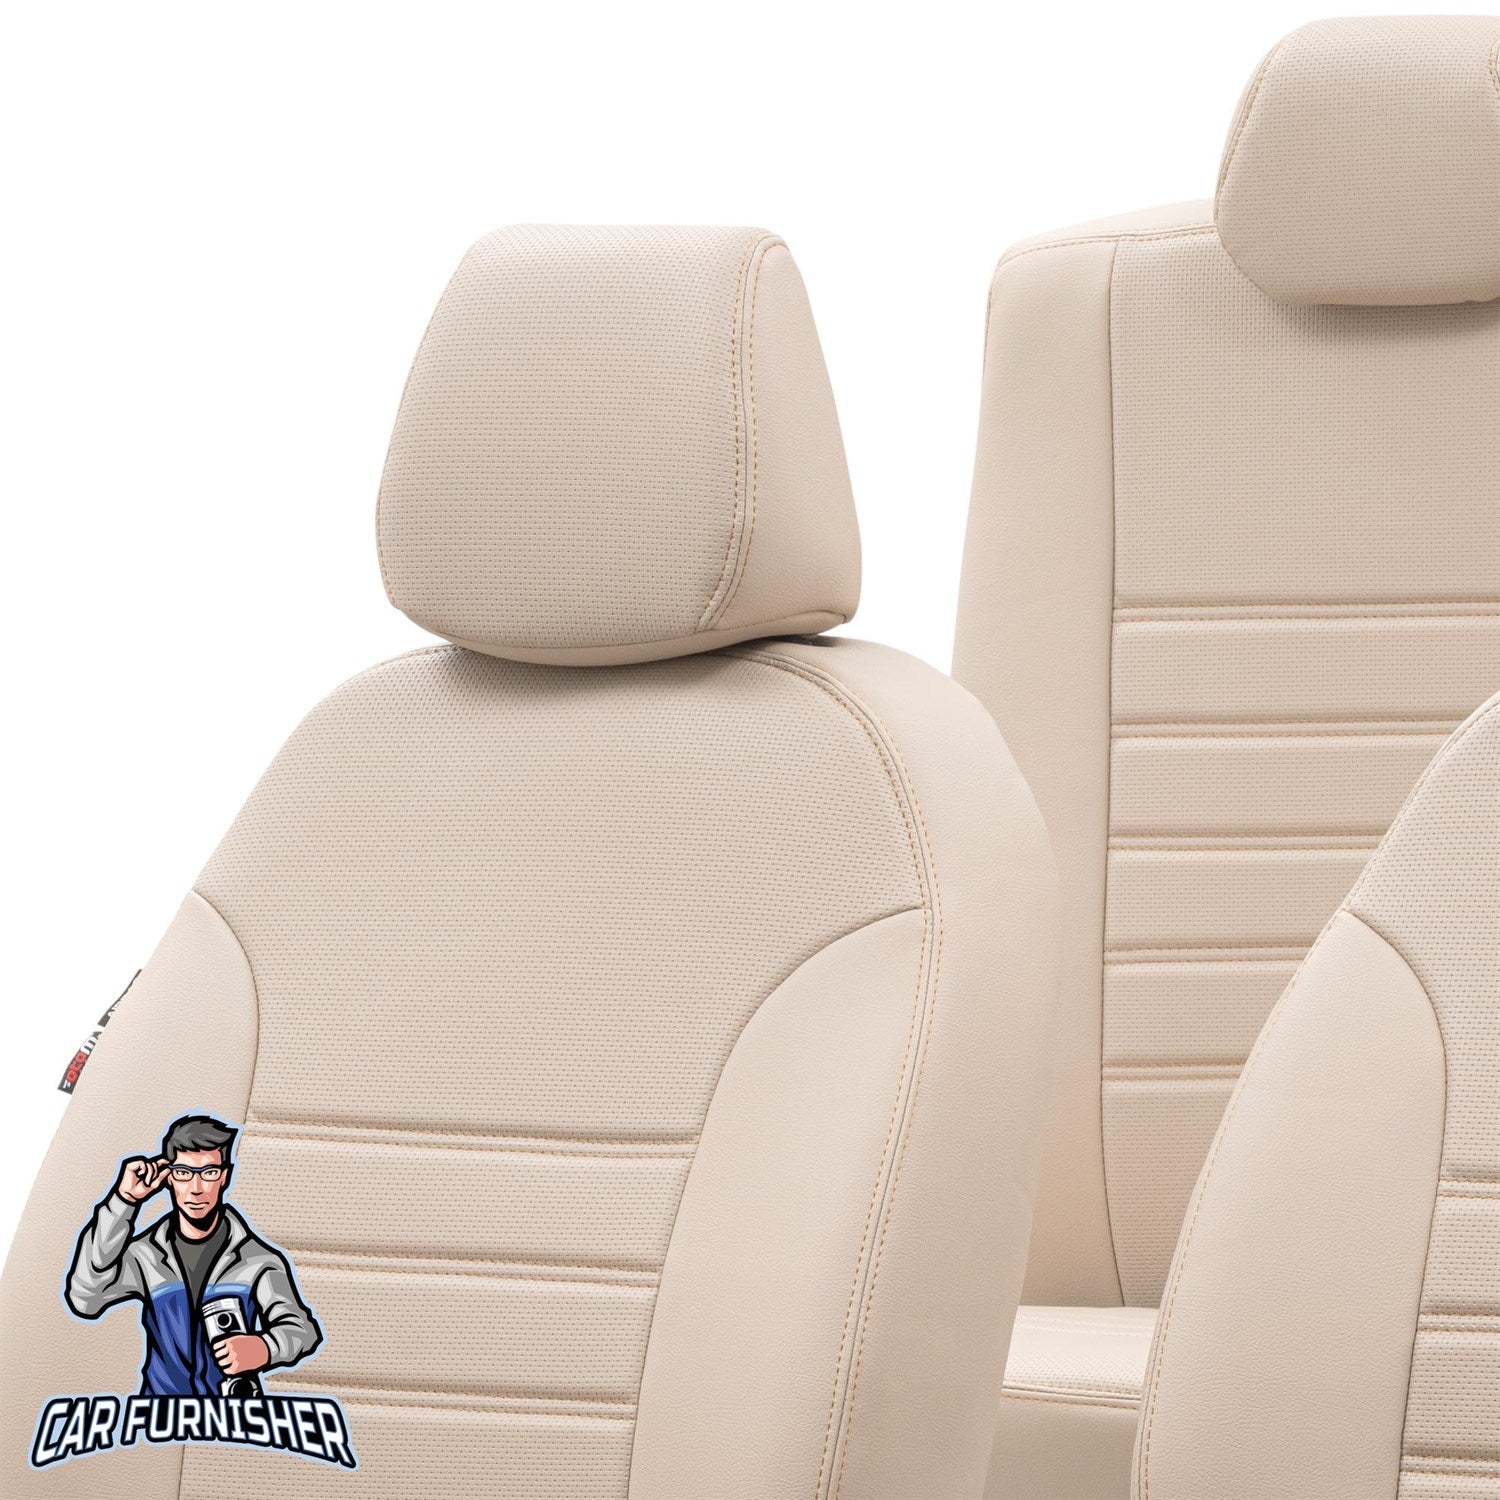 Toyota Yaris Seat Cover New York Leather Design Beige Leather